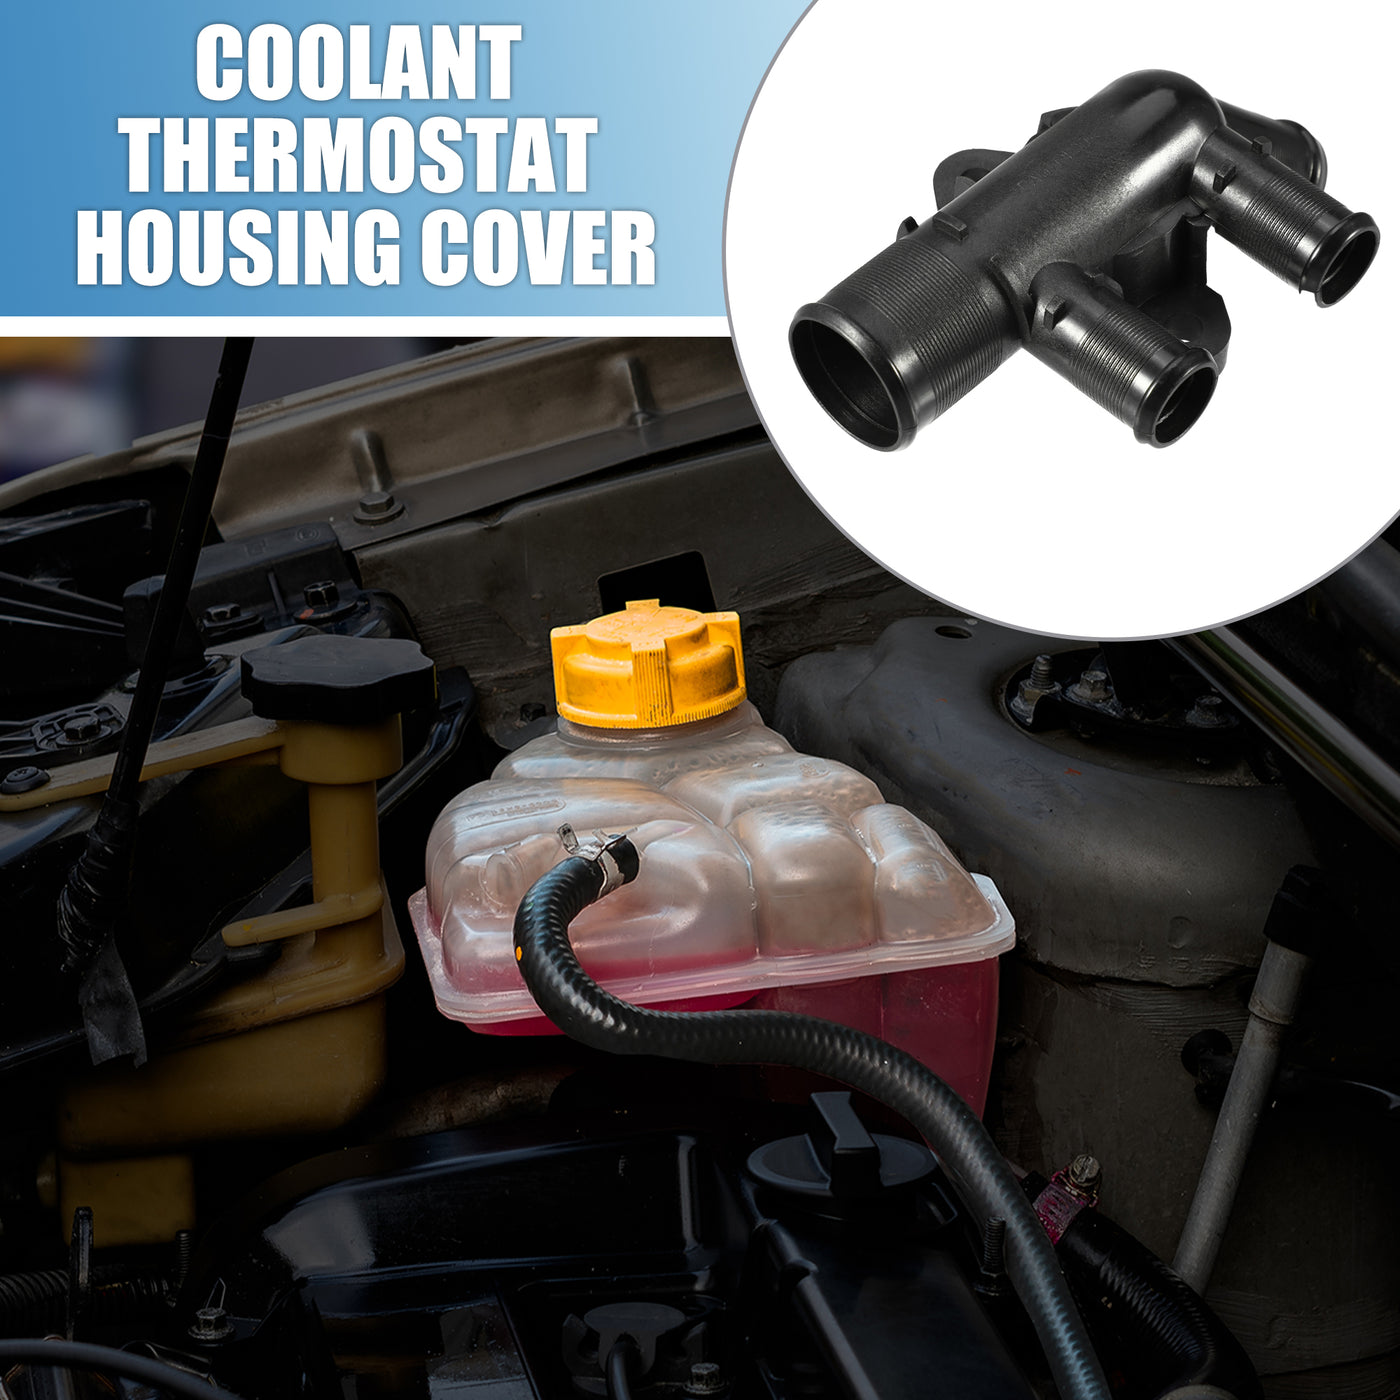 A ABSOPRO Coolant Thermostat Housing Cover No.1336G4 for Peugeot 306 405 406 806 Plastic Black